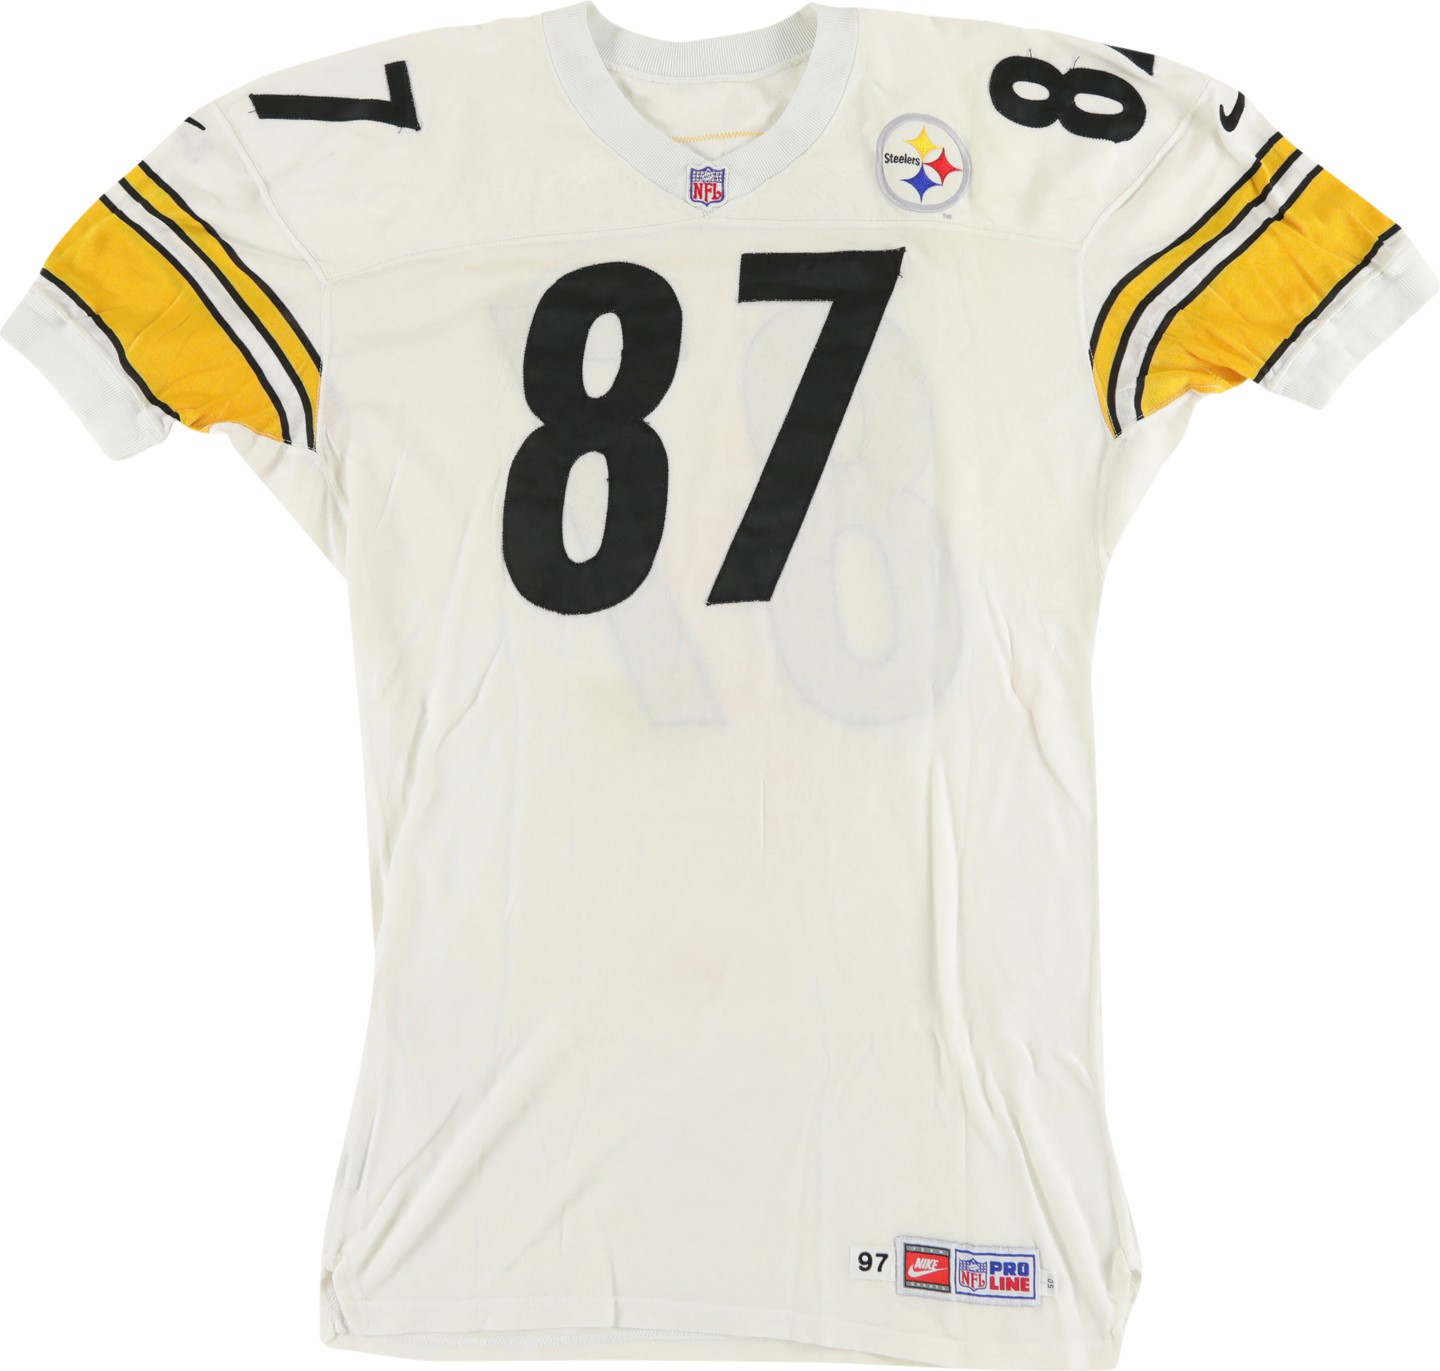 The Pittsburgh Steelers Game Worn Jersey Archive - 1997 Mark Bruener Game Worn Pittsburgh Steelers Jersey